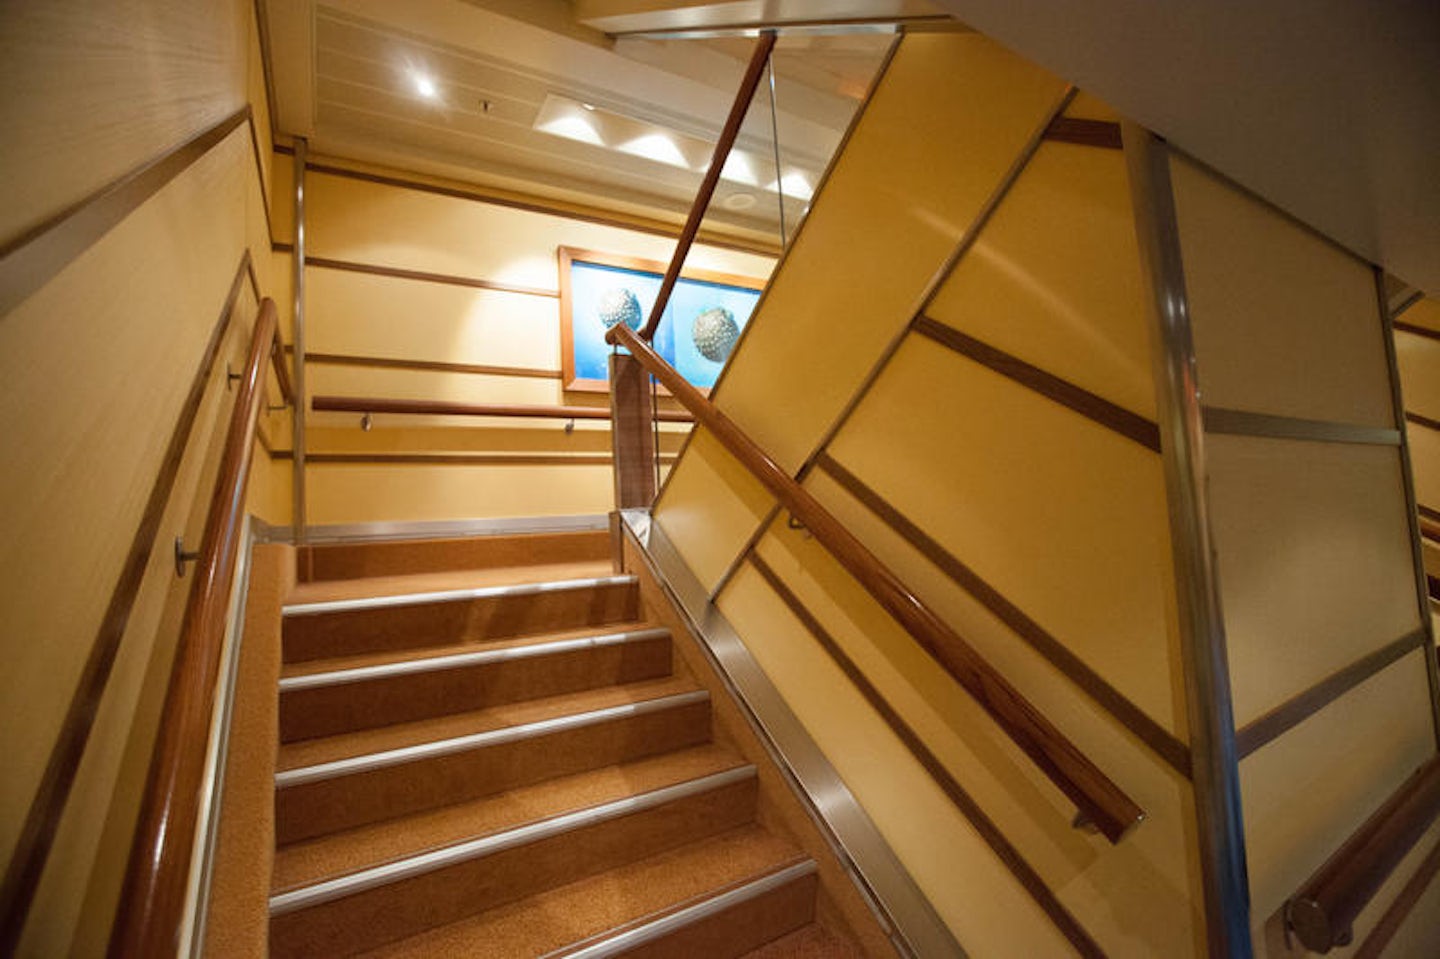 Stairs on Carnival Breeze